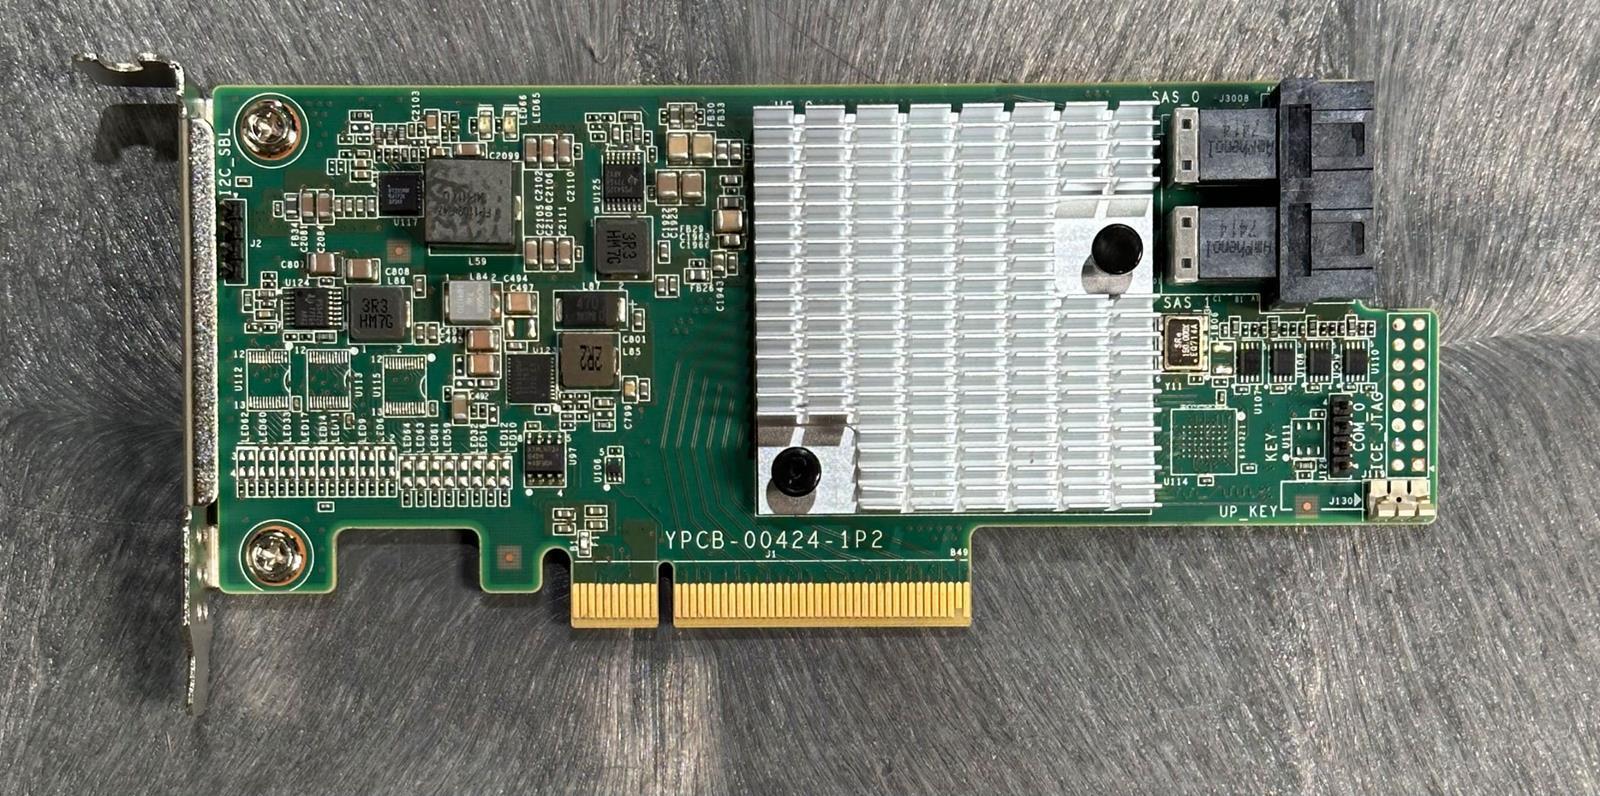 Inspur LSI YZCA-00424-101 Raid Card 12Gbps HBA Controller Low Profile 9300-8i IT